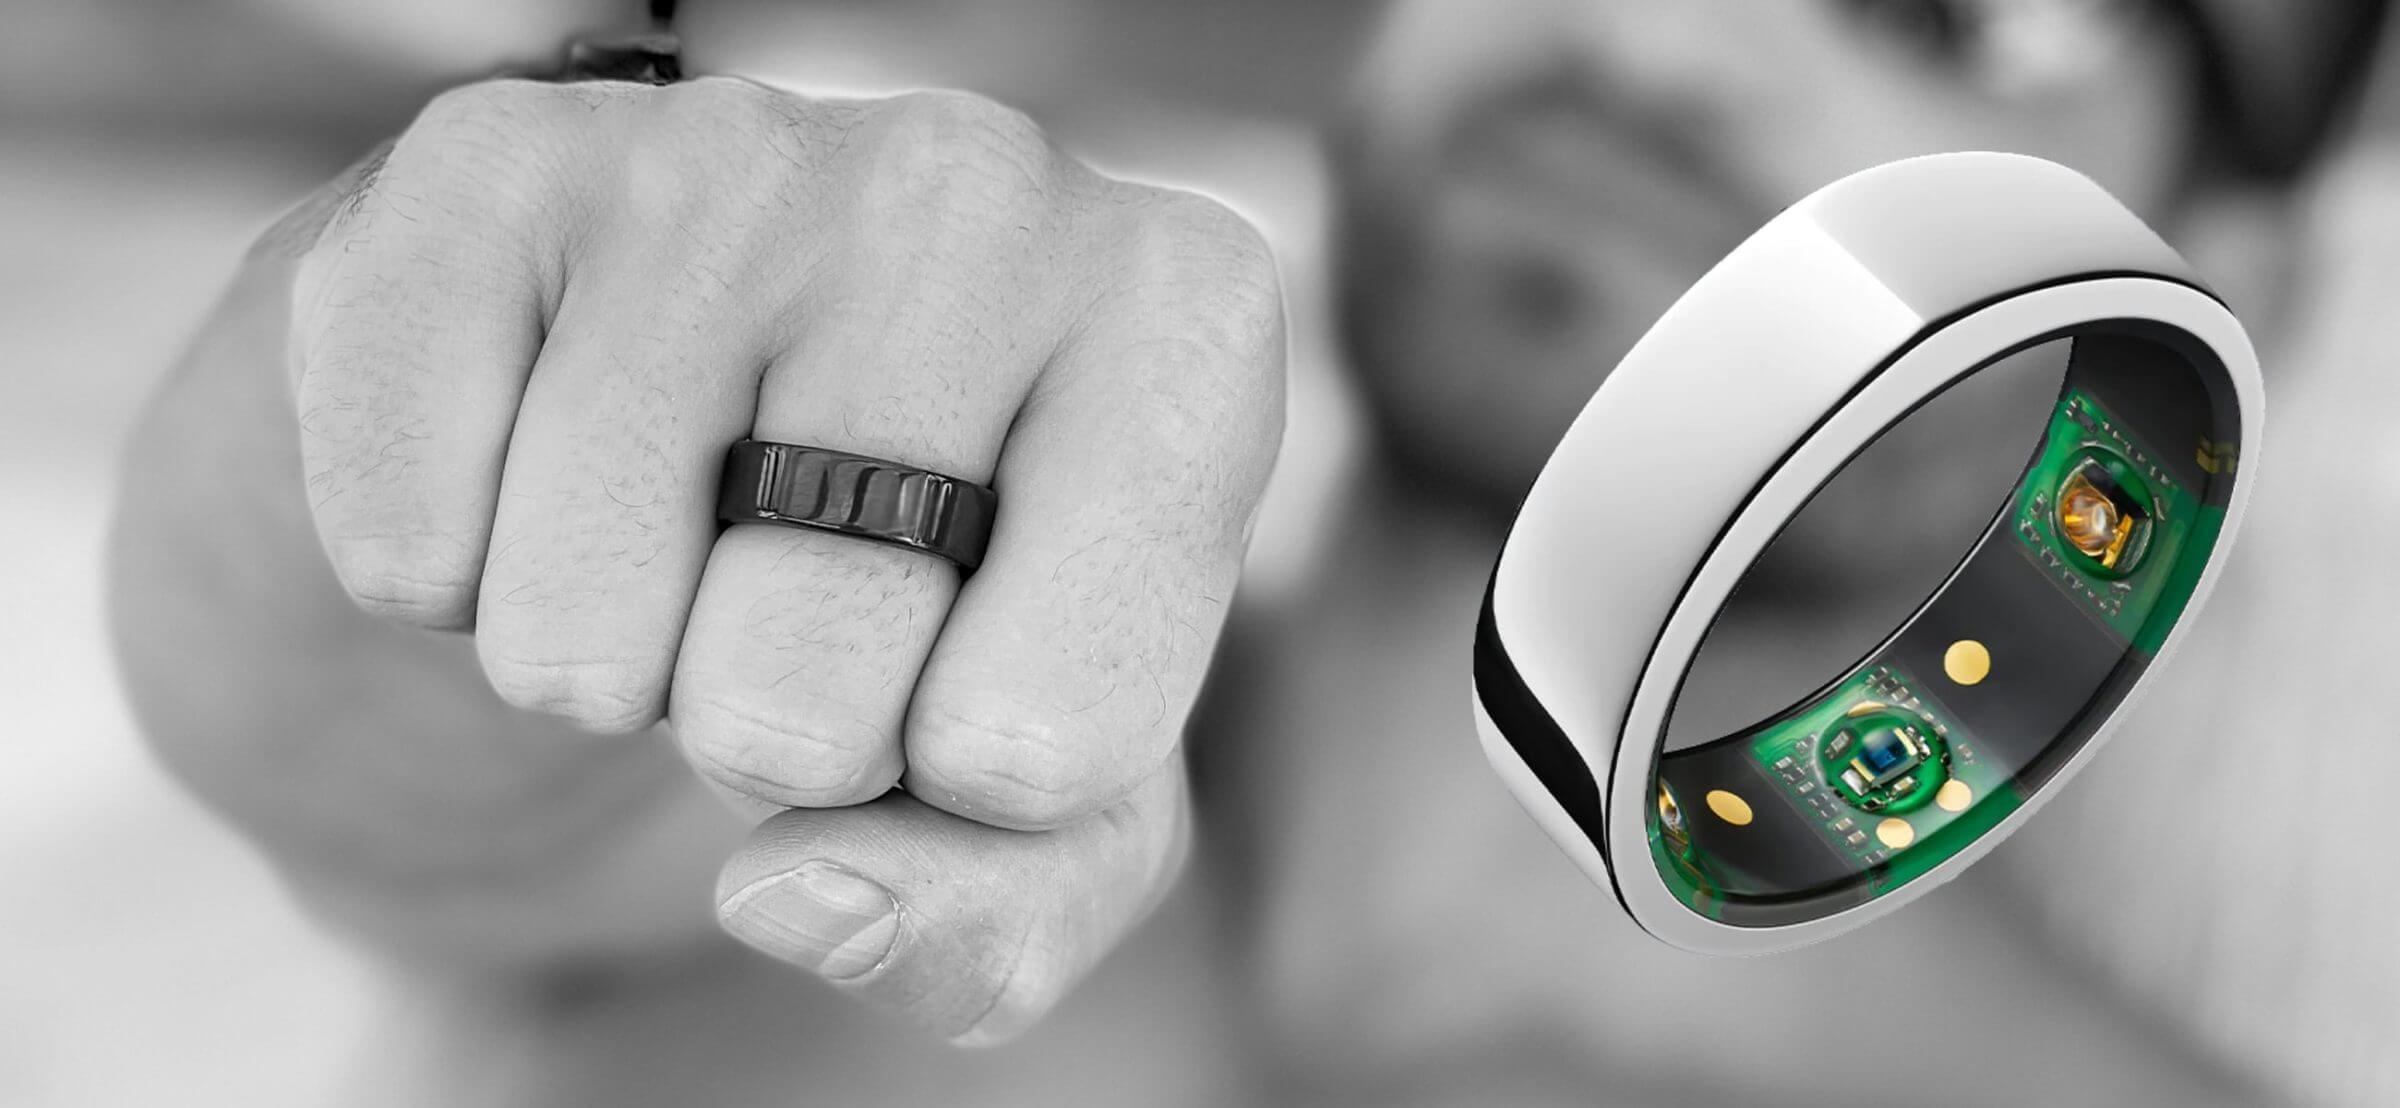 Oura Ring 3 Hands-On Review and Comparison (with WHOOP 4.0)